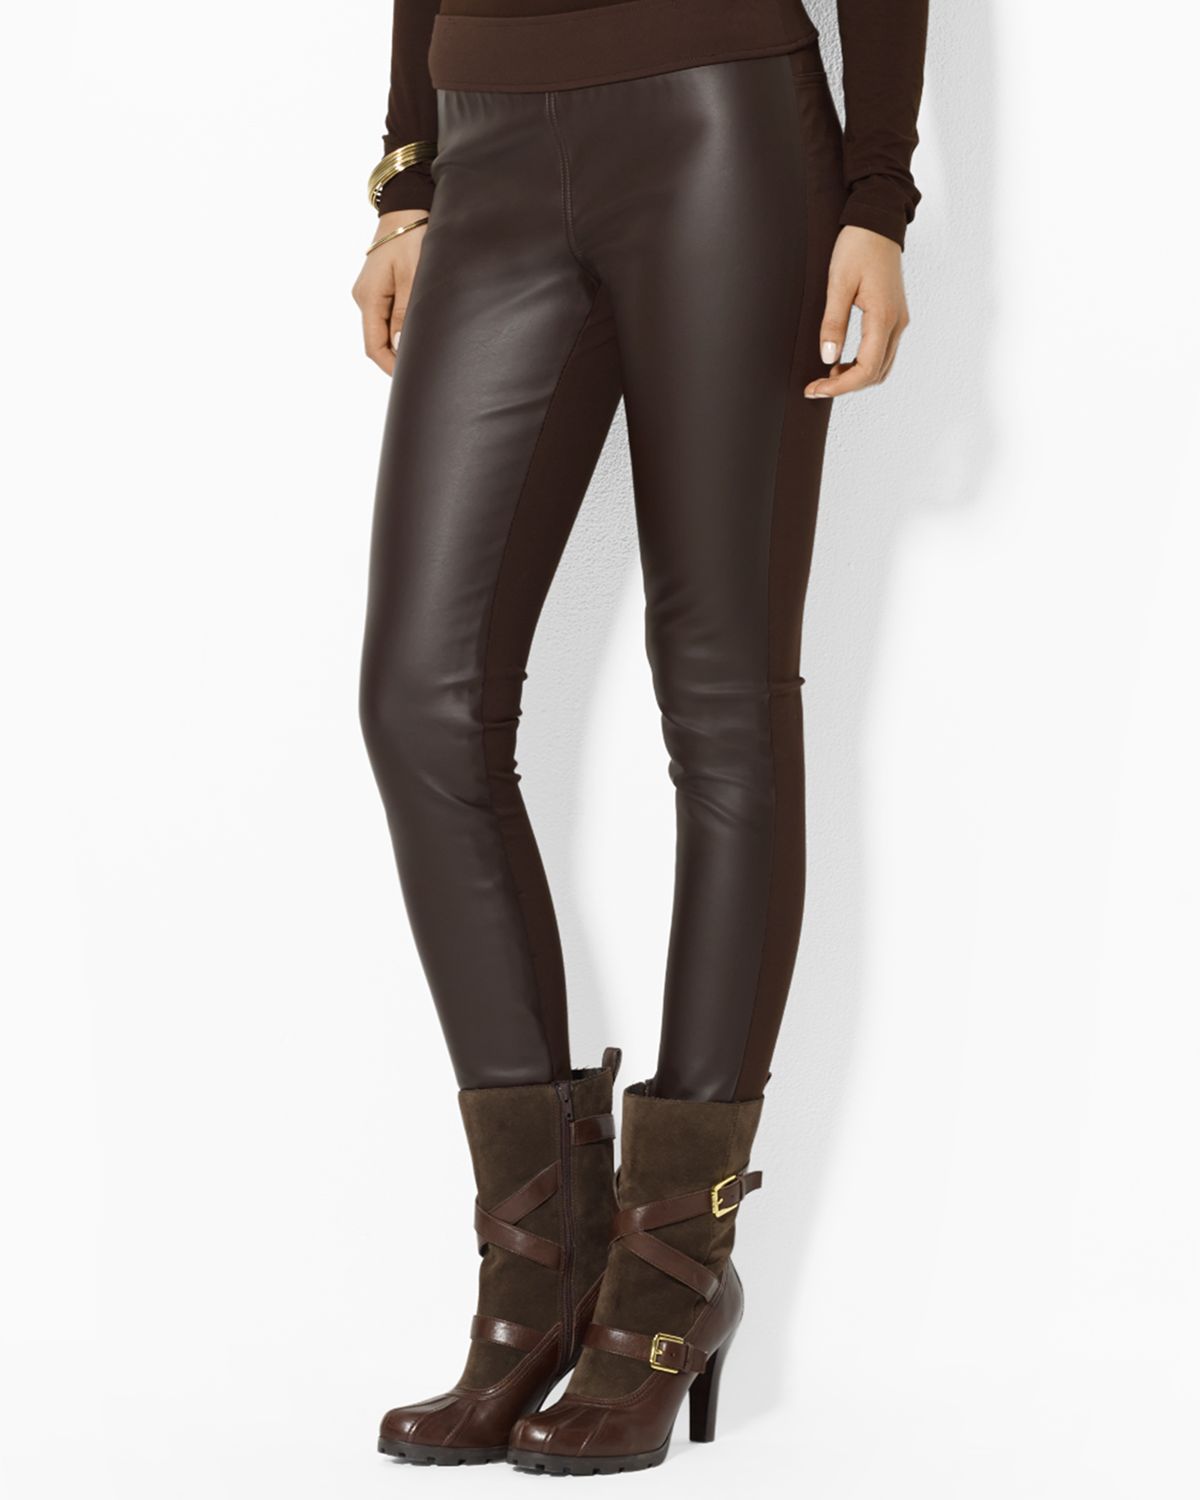 Durable And Long-Wearing Chocolate Faux Leather Leggings - A Yellow Lotus